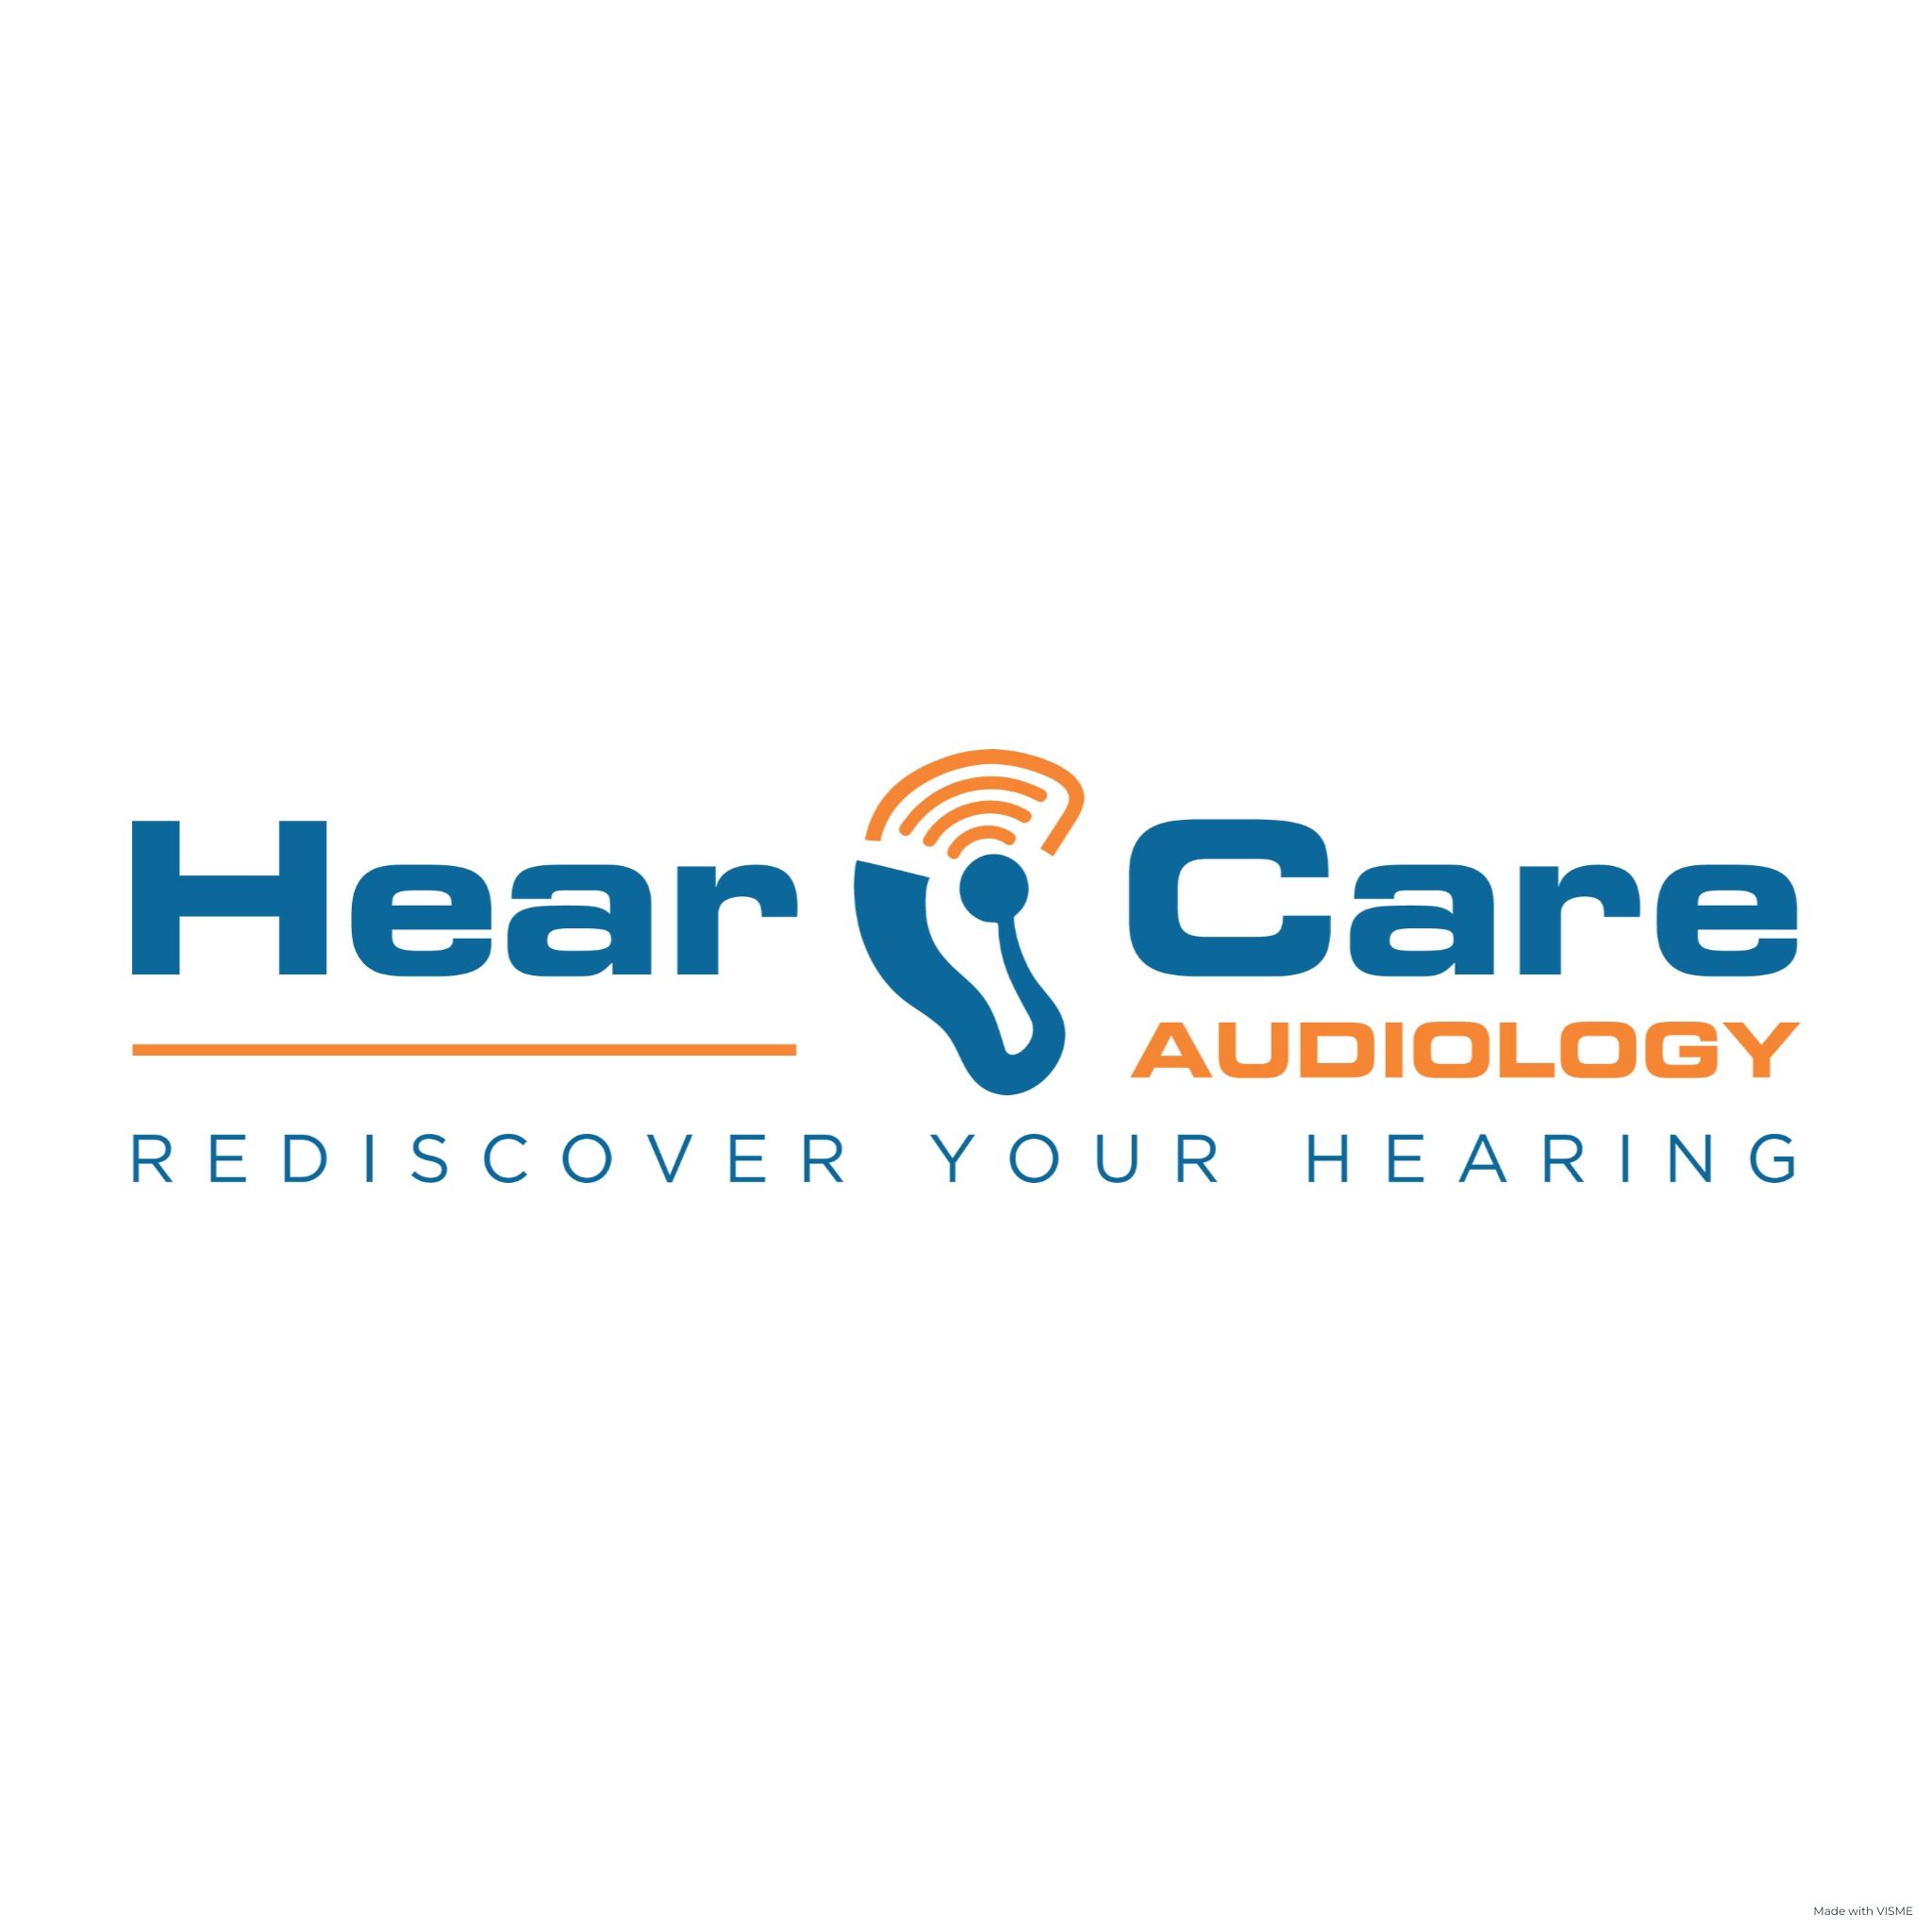 HearCare Audiology